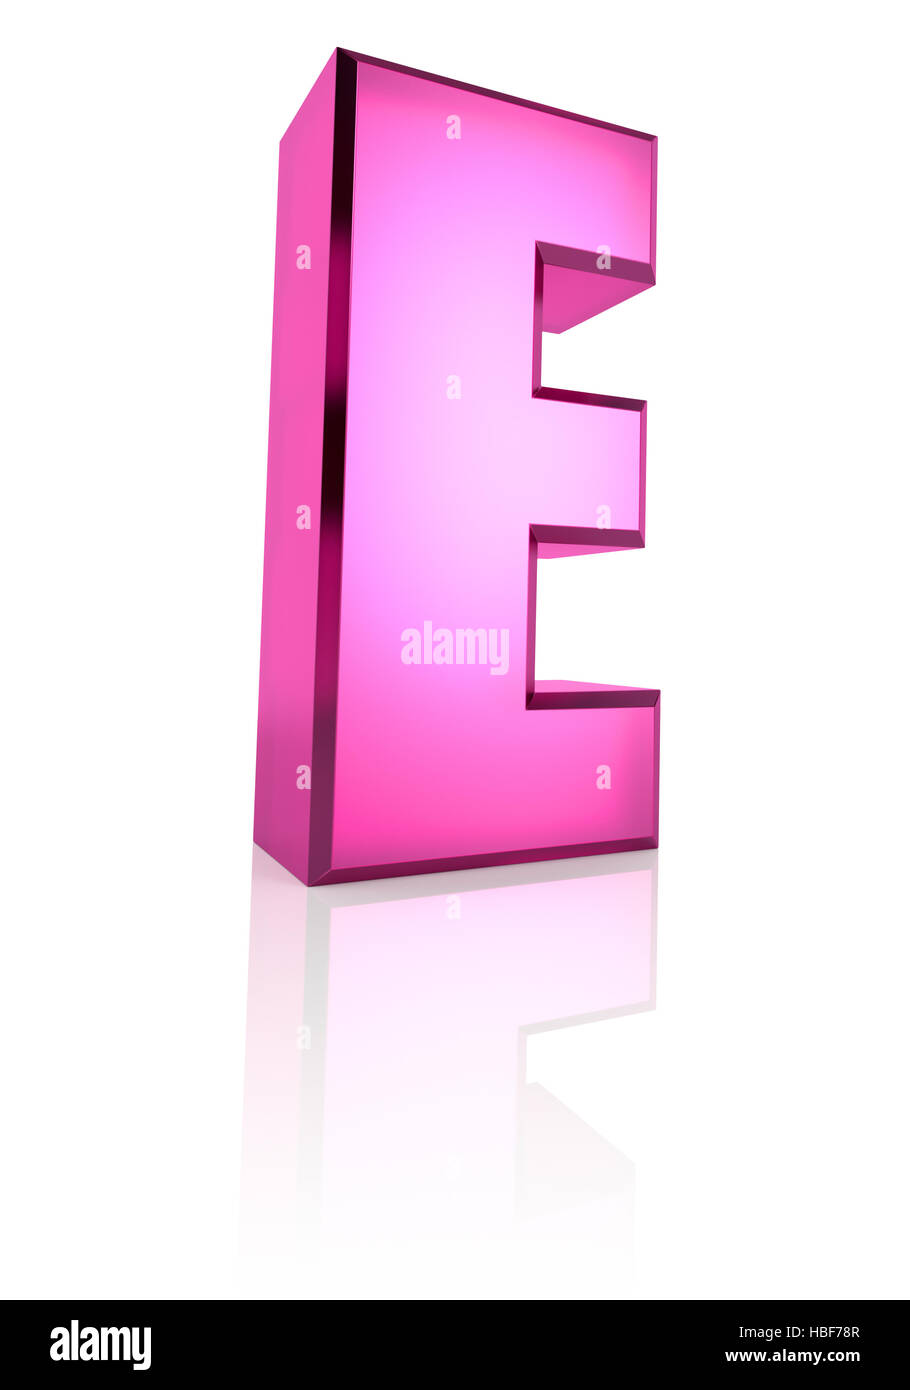 Pink Letter E Stock Photo